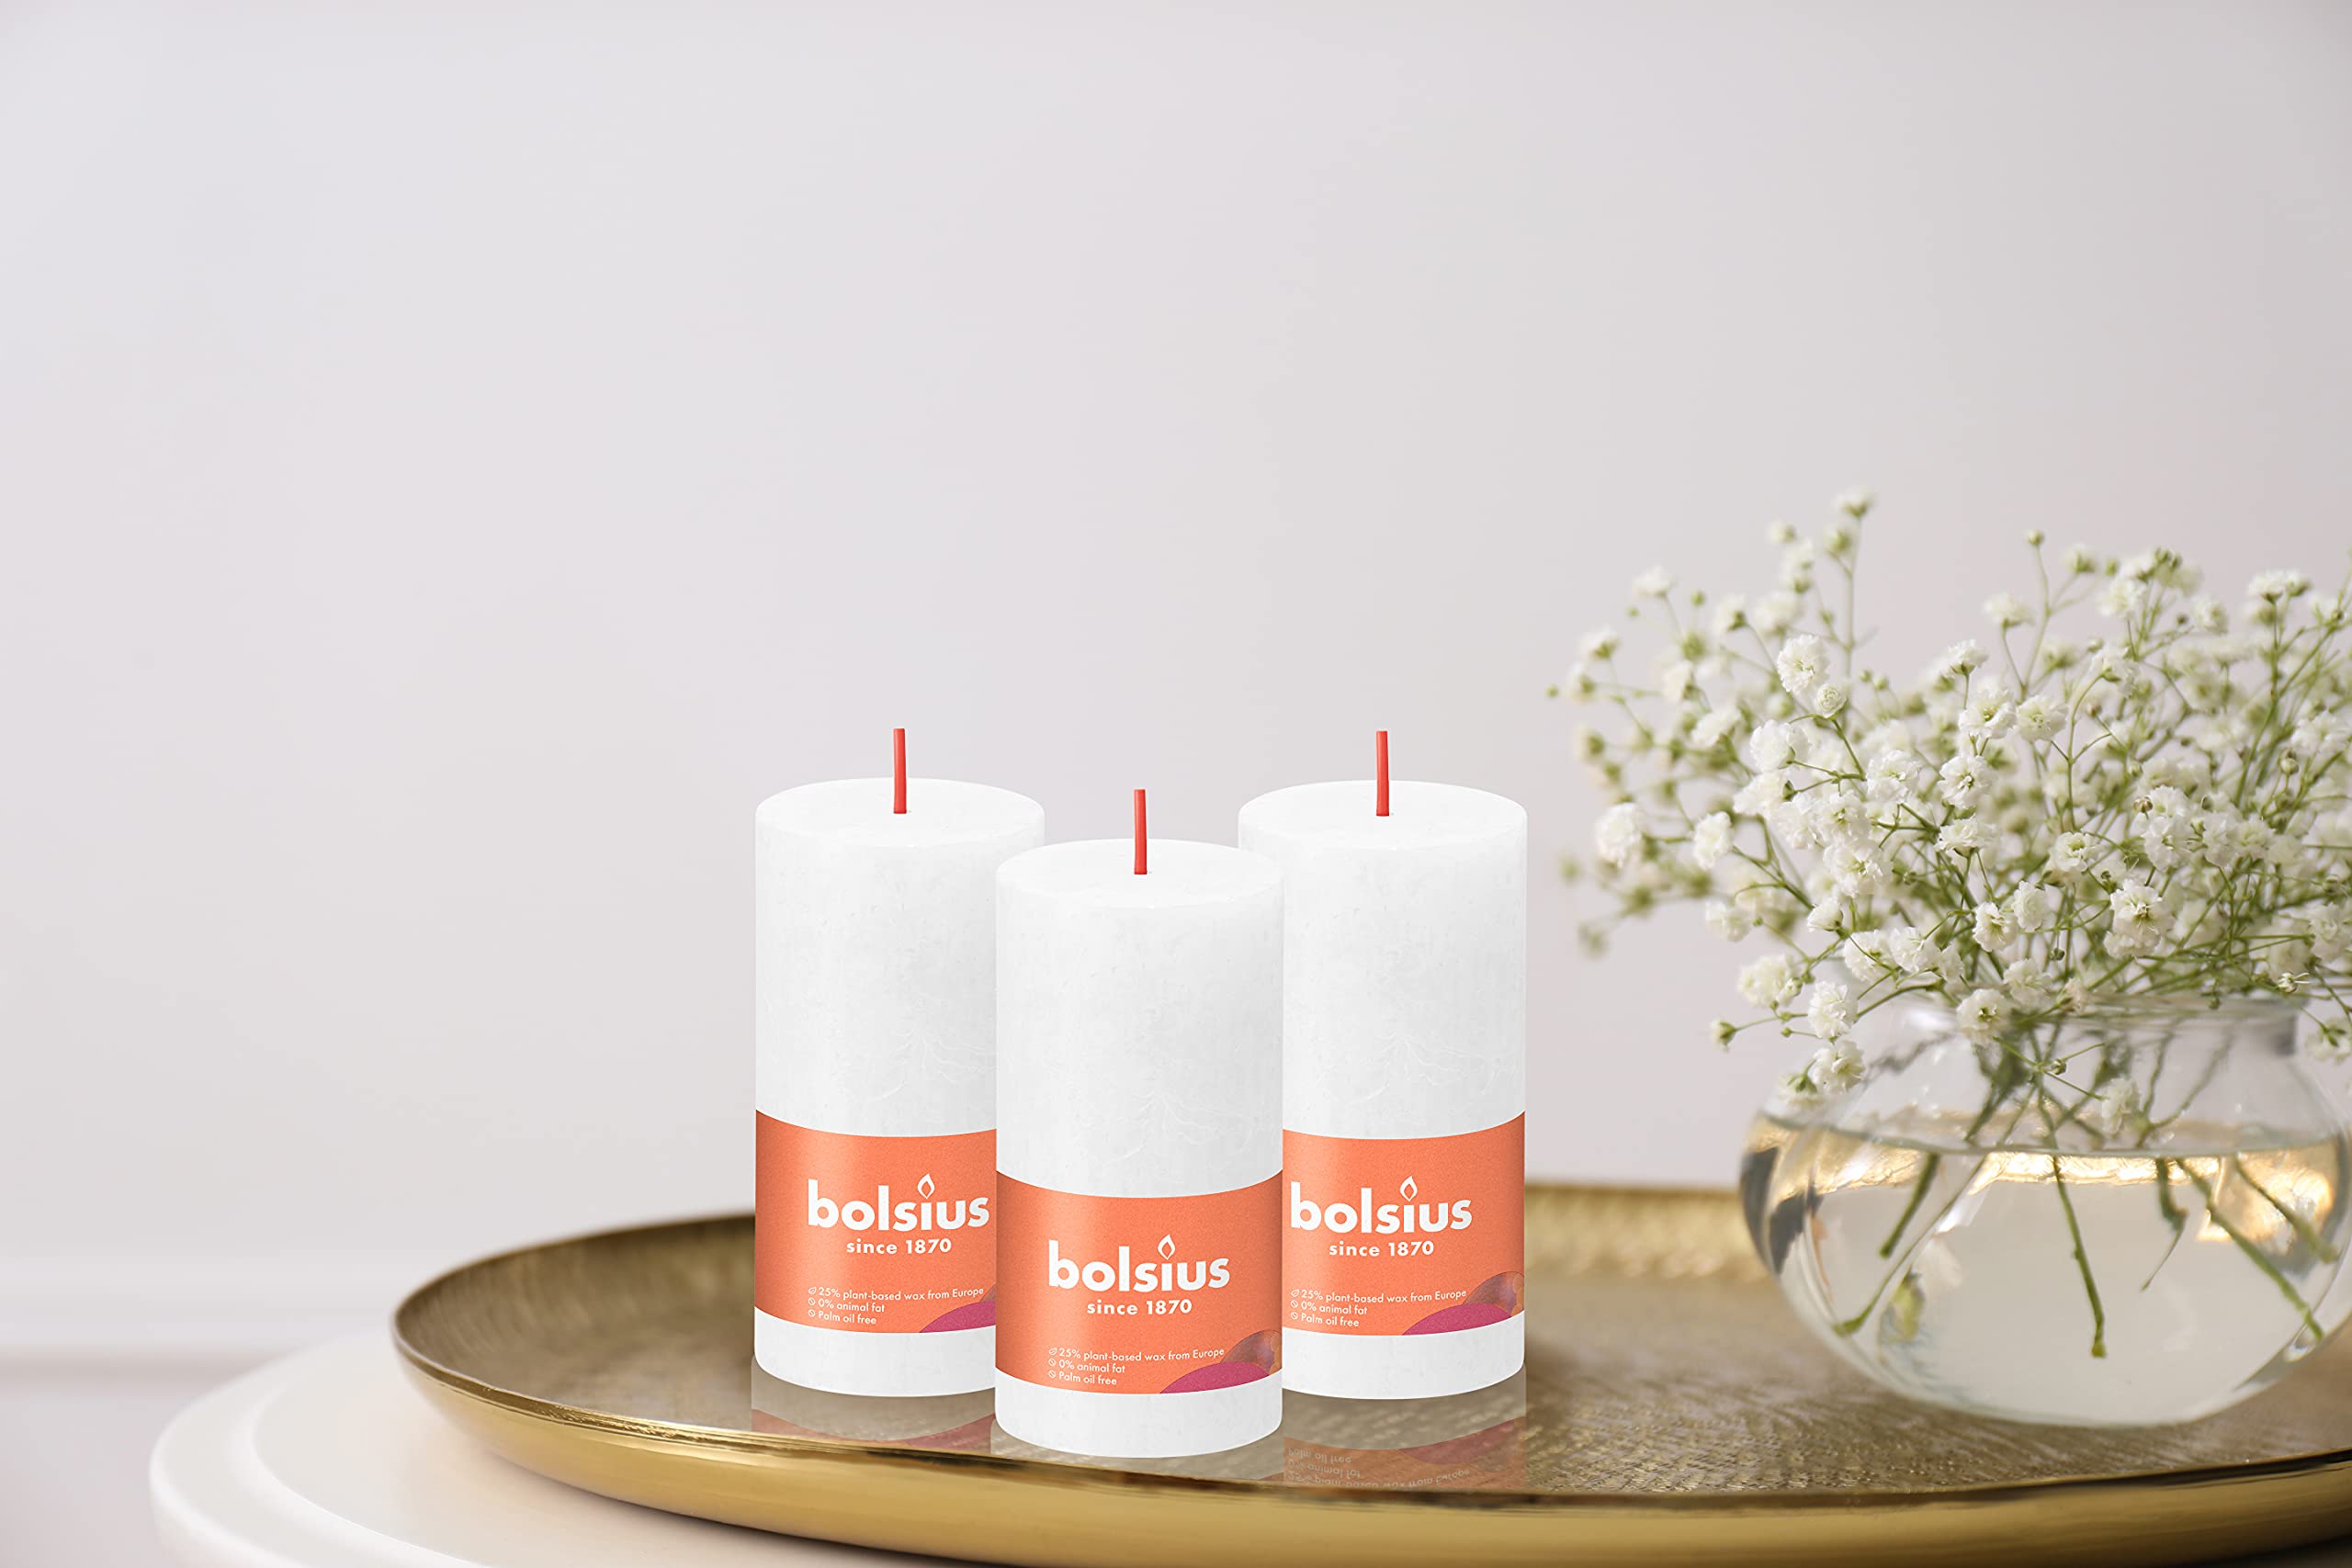 BOLSIUS 4 Pack Pillar Candles - 2 X 4 Inches - Premium European Quality - Natural Eco-Friendly Plant-Based Wax - Unscented Dripless Smokeless 30 Hour Party Décor and Wedding Candles  - Like New